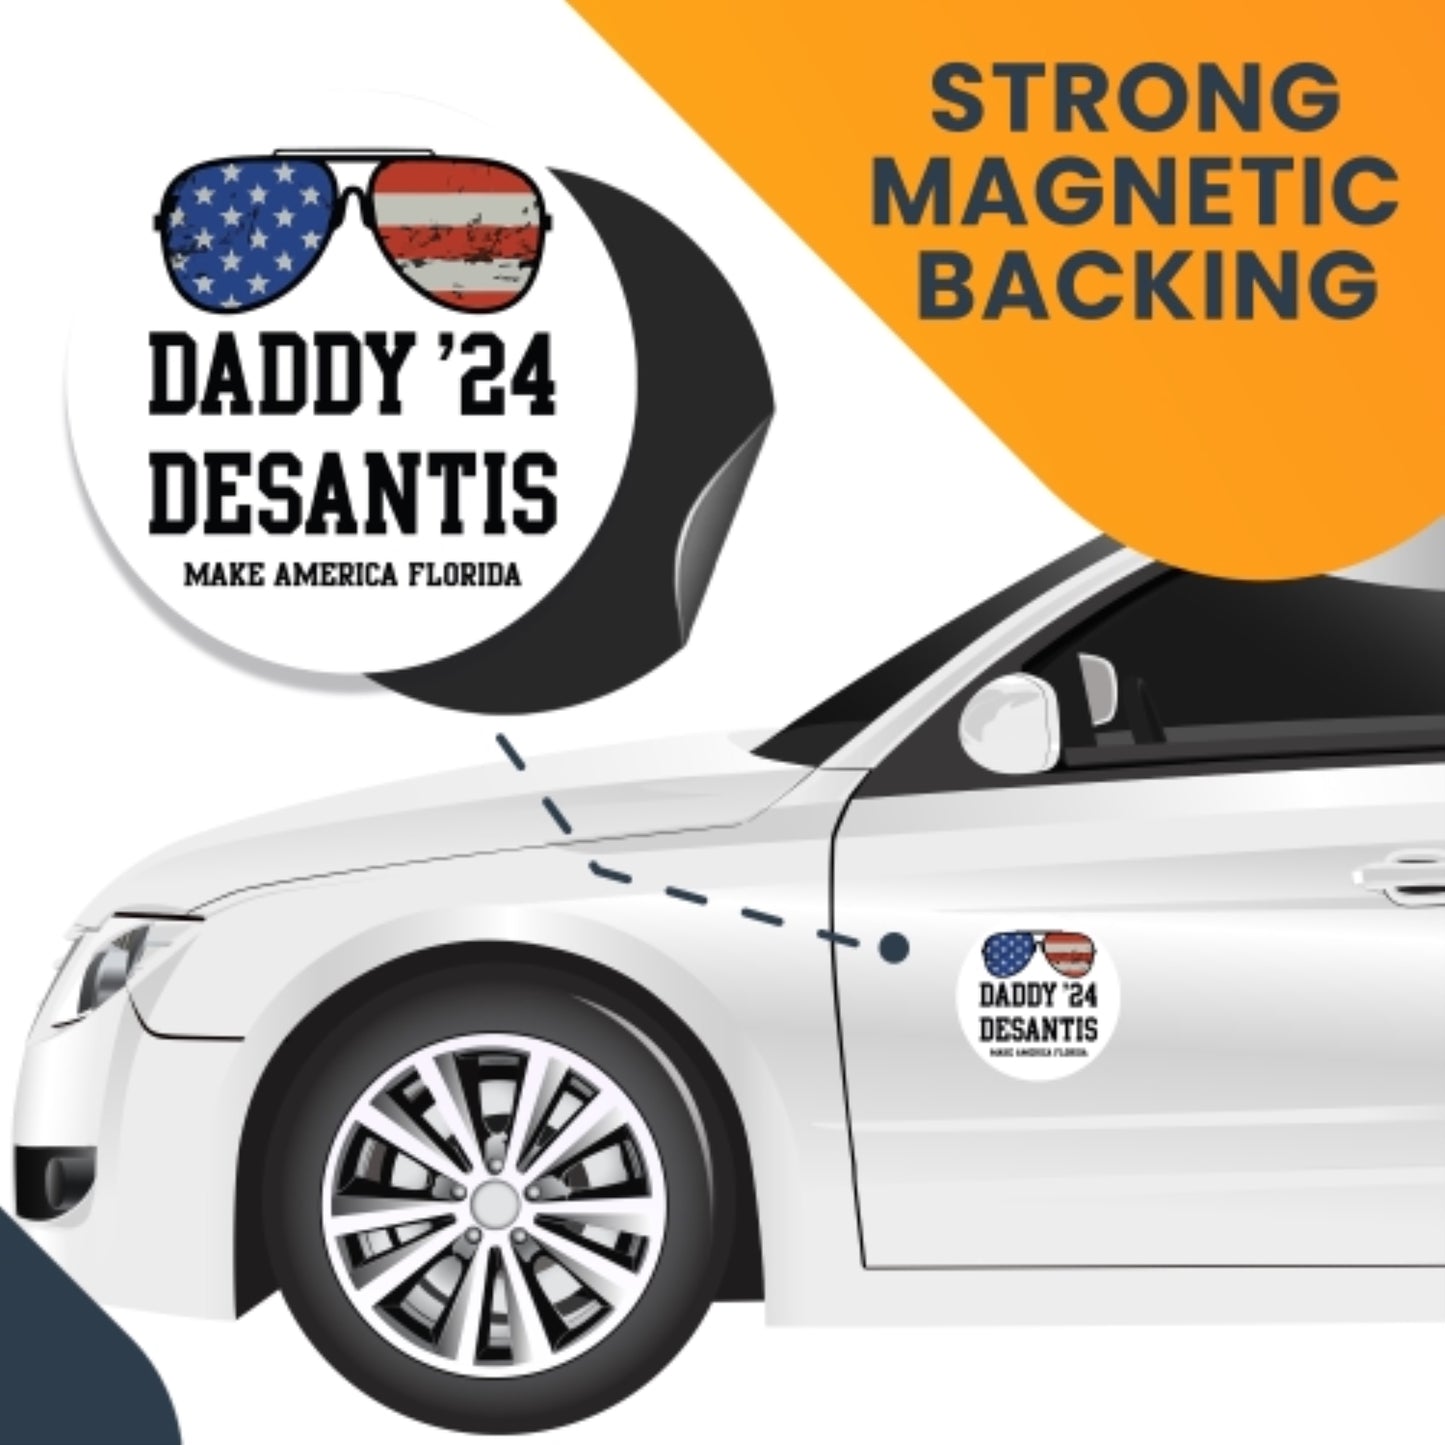 Magnet Me Up Daddy Desantis 2024 Republican Party Magnet Decal, 5 Inch, White, Heavy Duty Automotive Magnet for Car Truck SUV Or Any Other Magnetic Surface